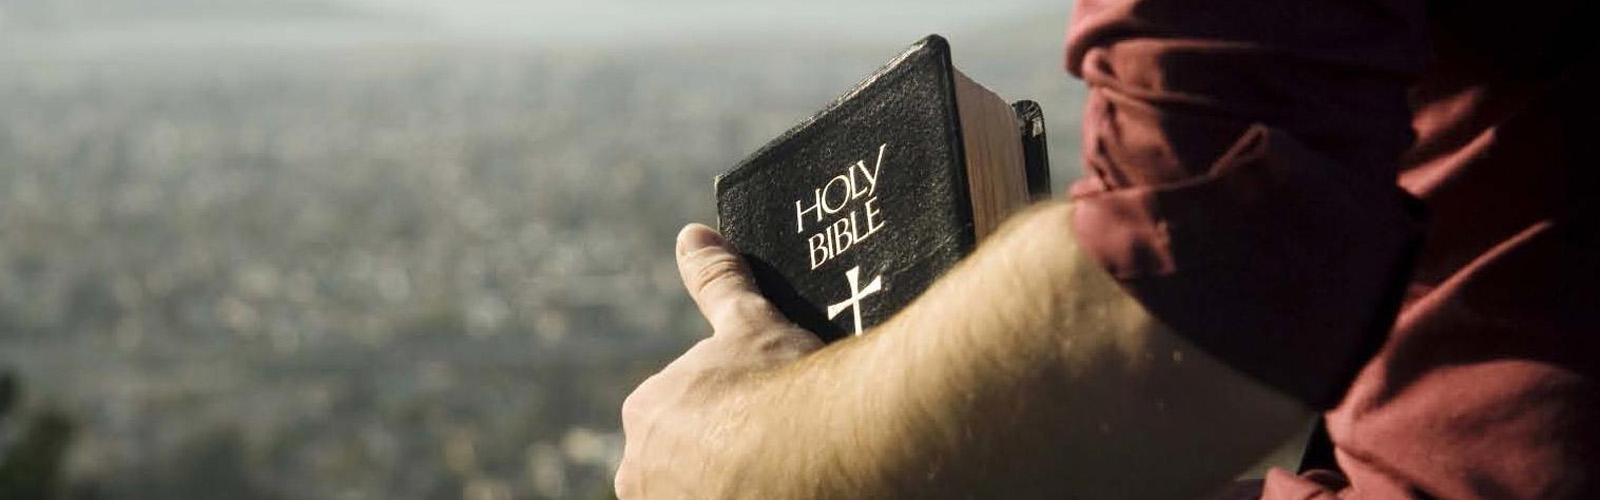 bible-in-hand-1600